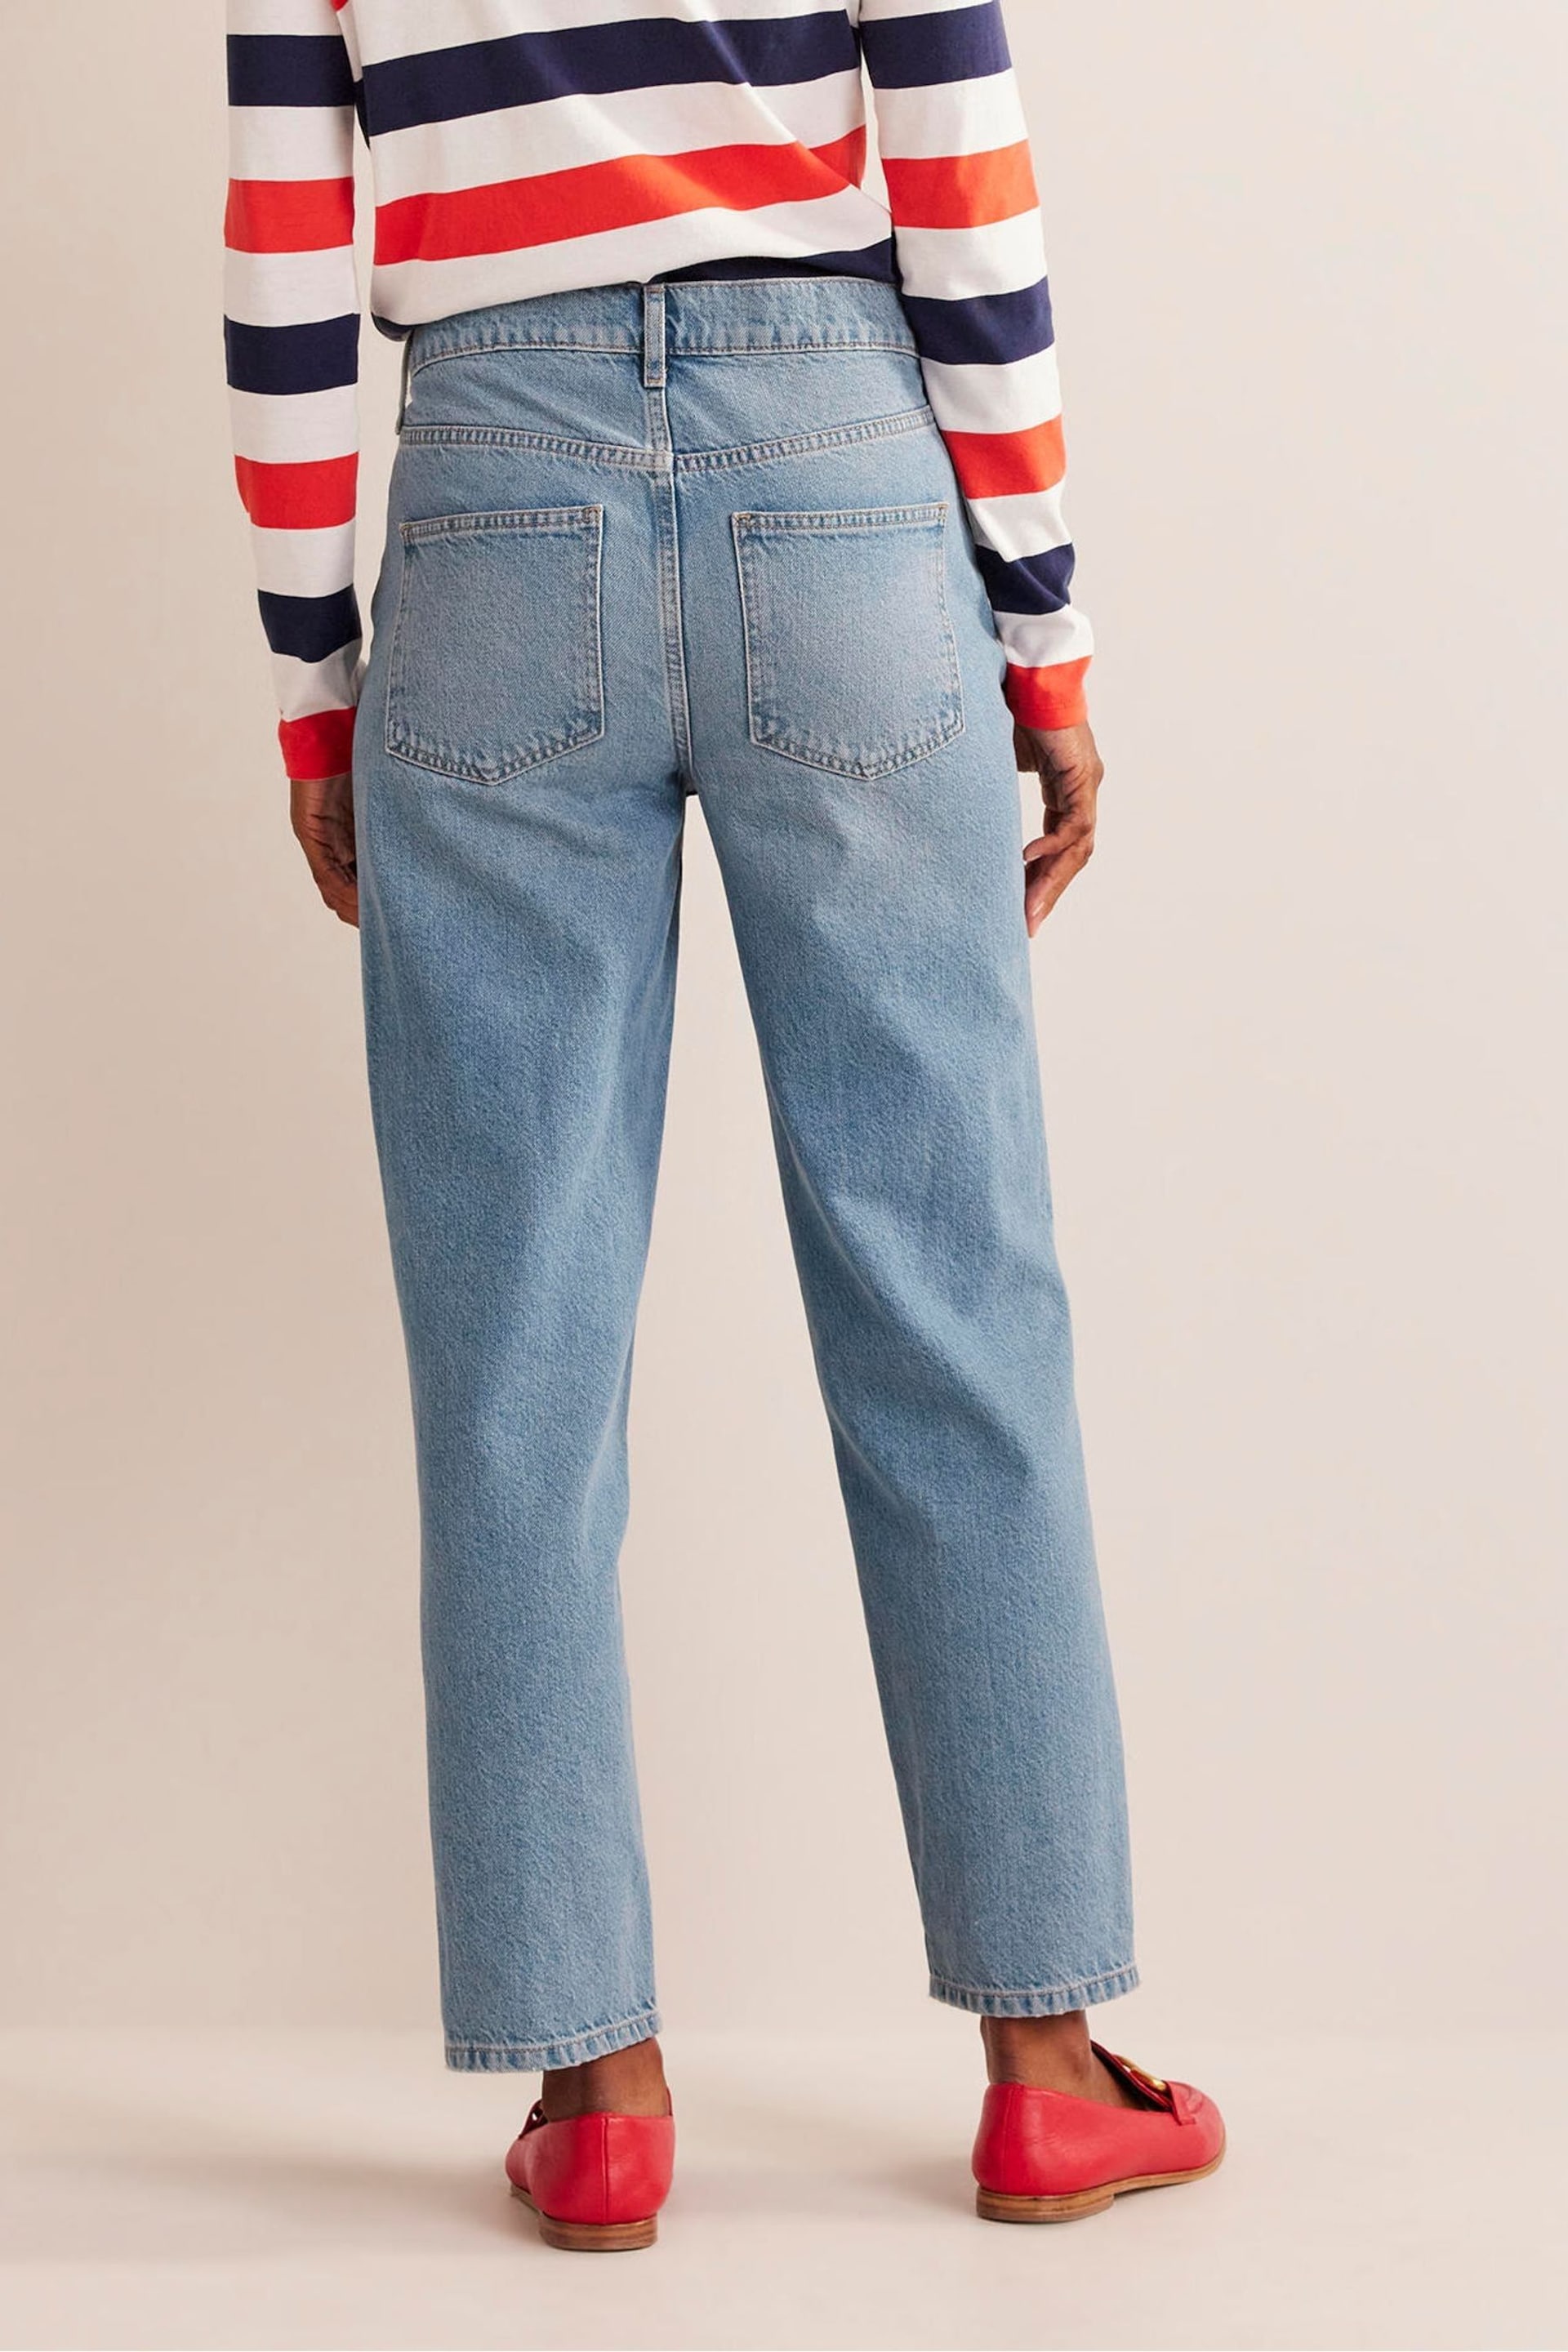 Boden Light Blue Mid Rise Tapered Jeans - Image 4 of 9